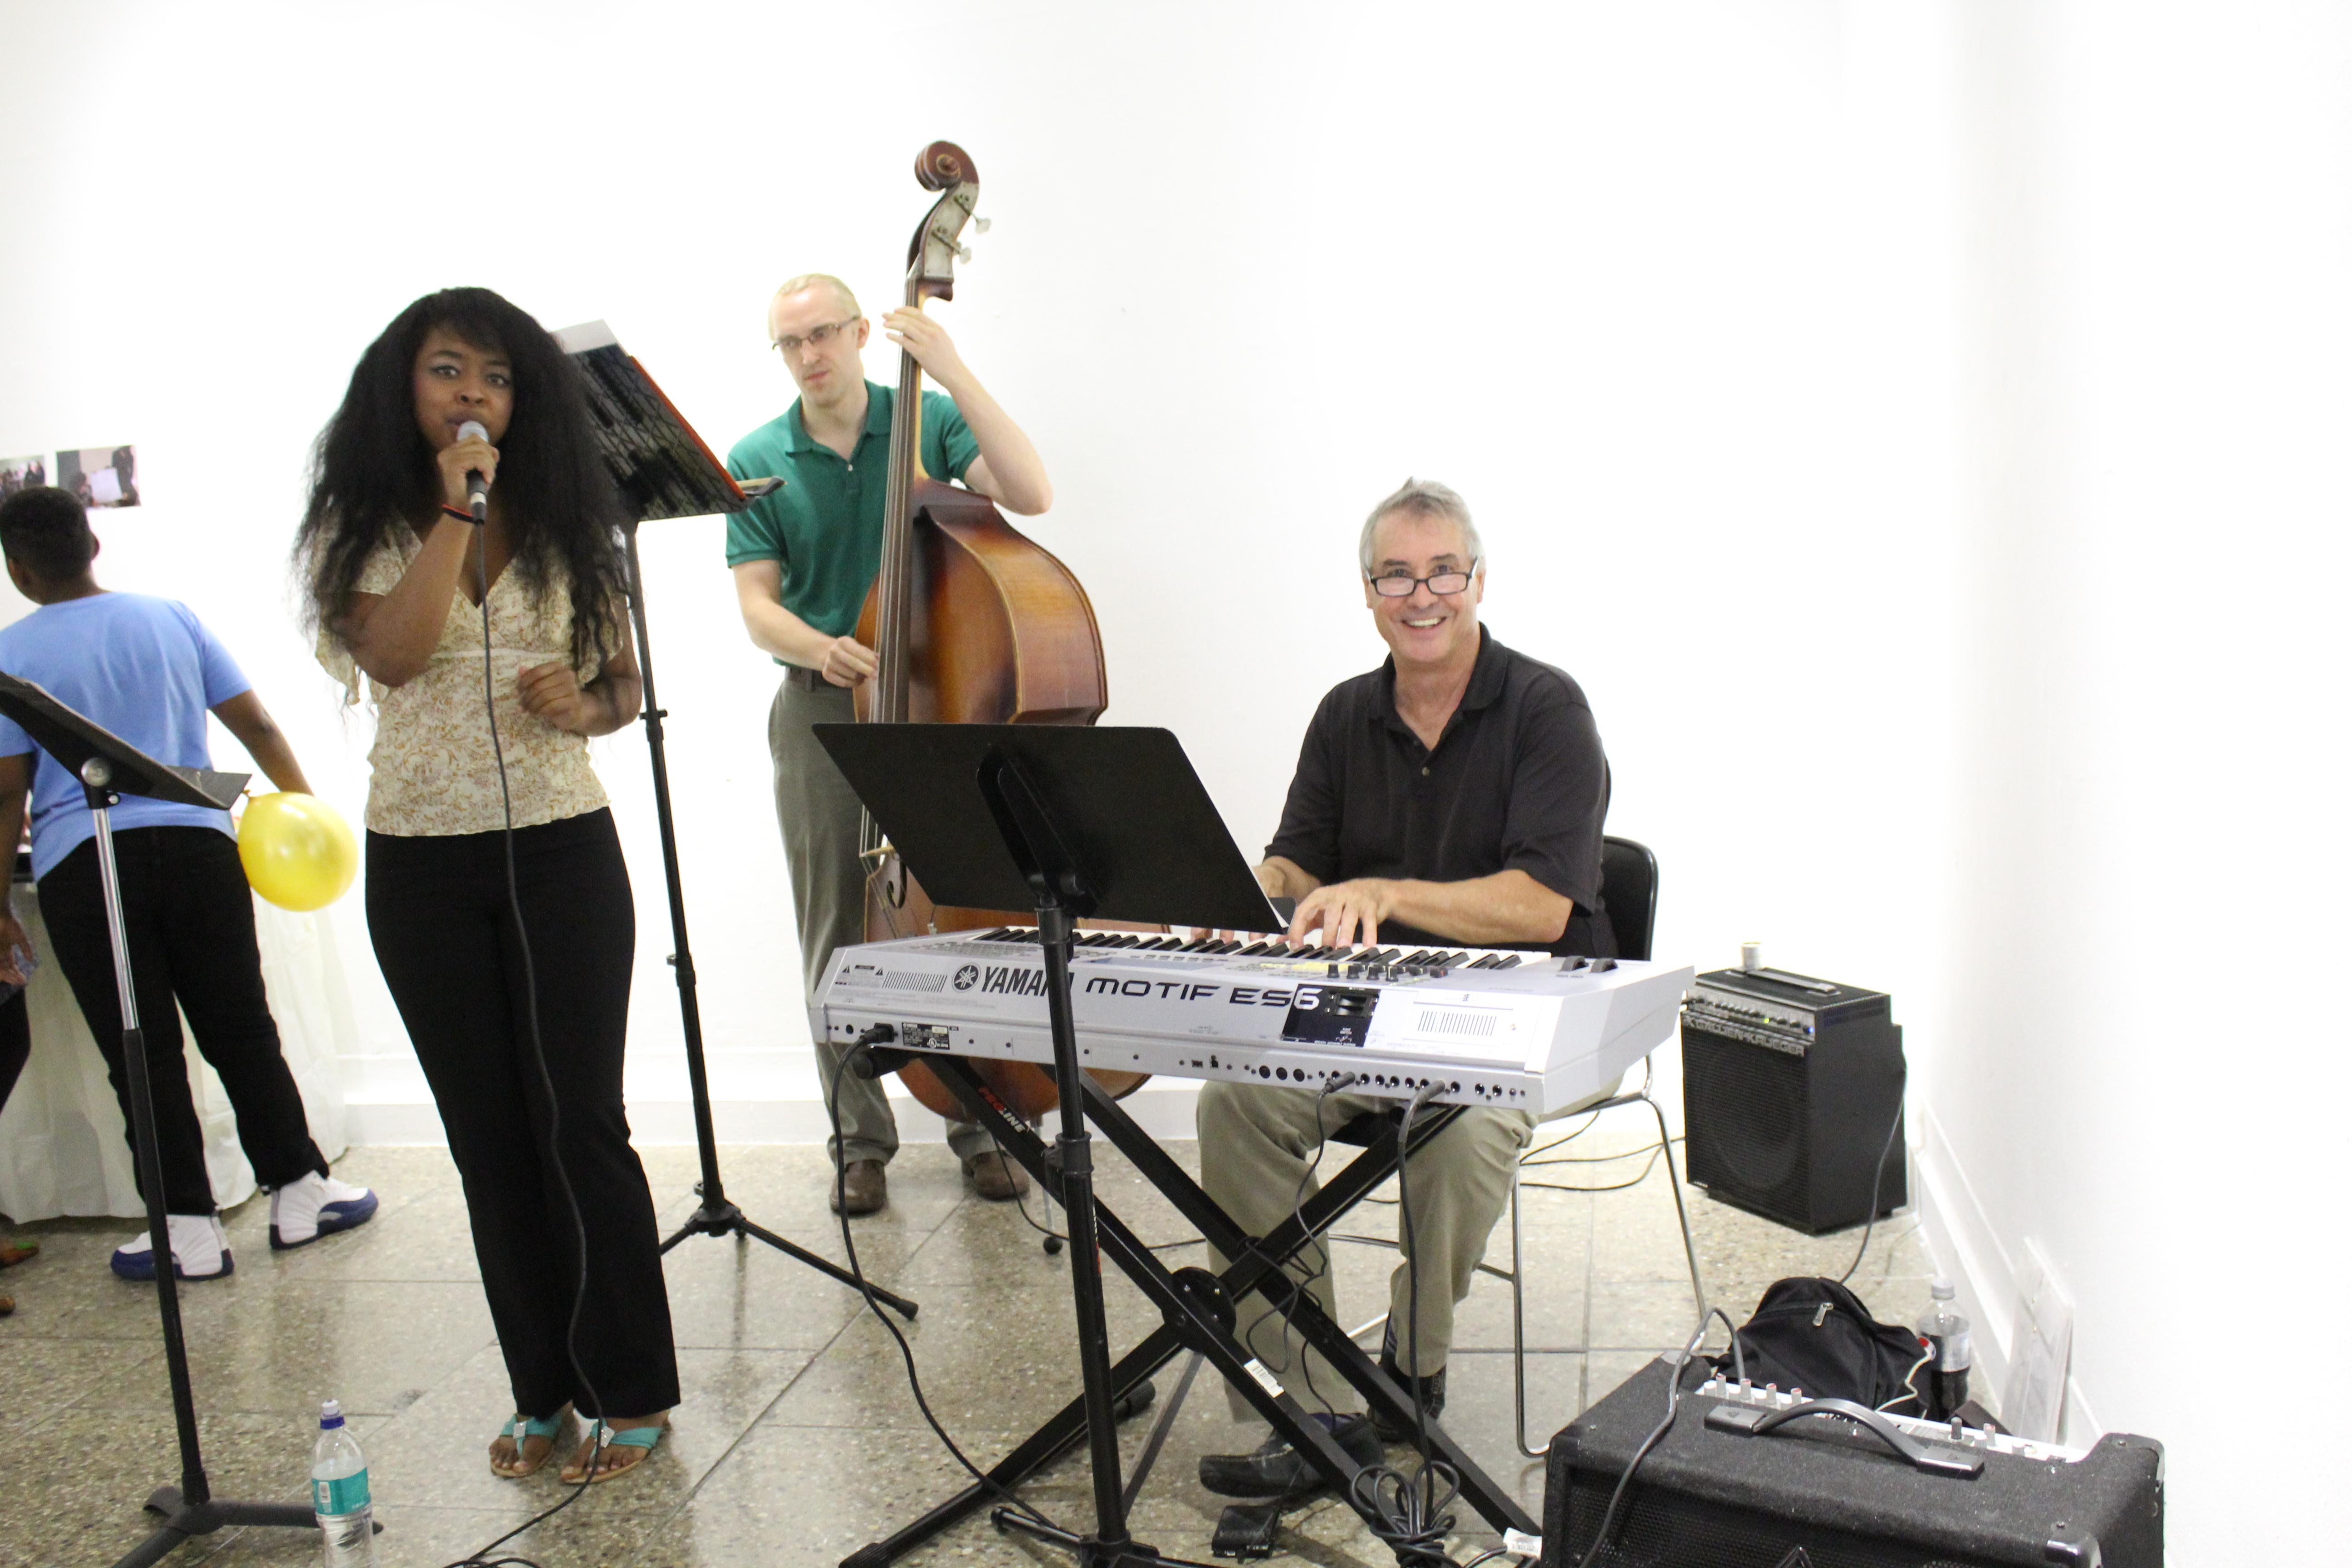 Former Urban Scholars staff surprised many students at the art gallery, by playing piano in the jazz band!